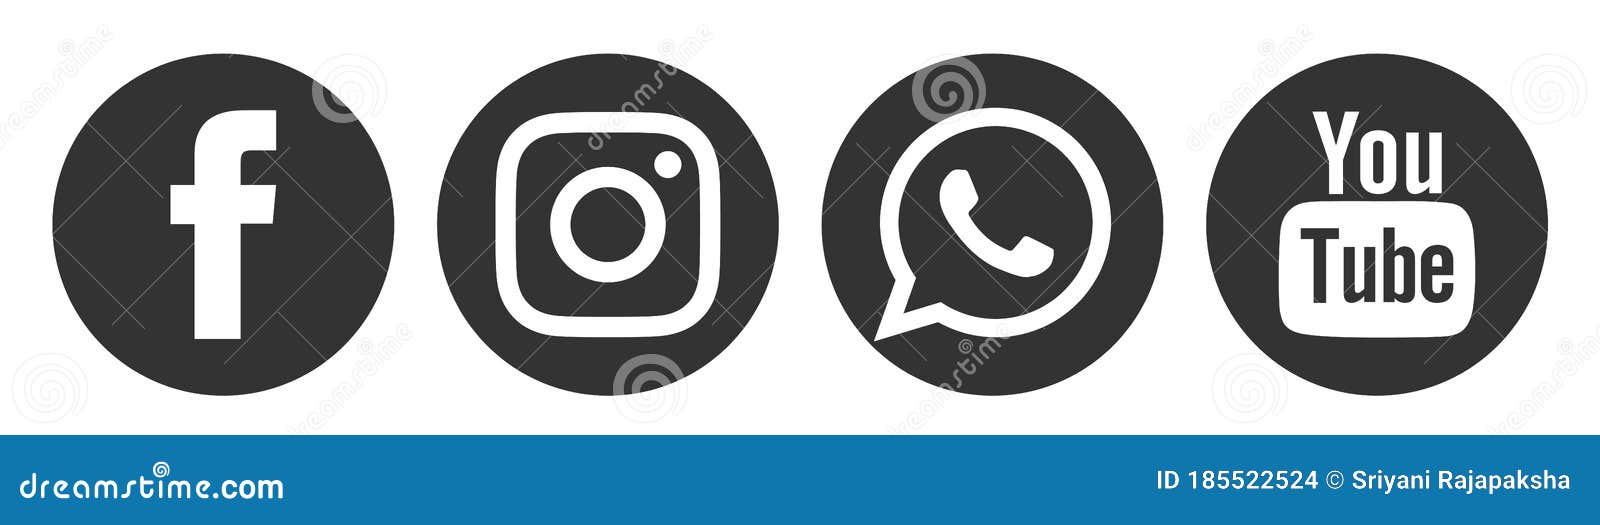 Facebook, Instagram, Whatsapp, Youtube Social Media Logo Icon in Black  Vector Isolated on White Background Editorial Stock Image - Illustration of  icon, button: 185522524